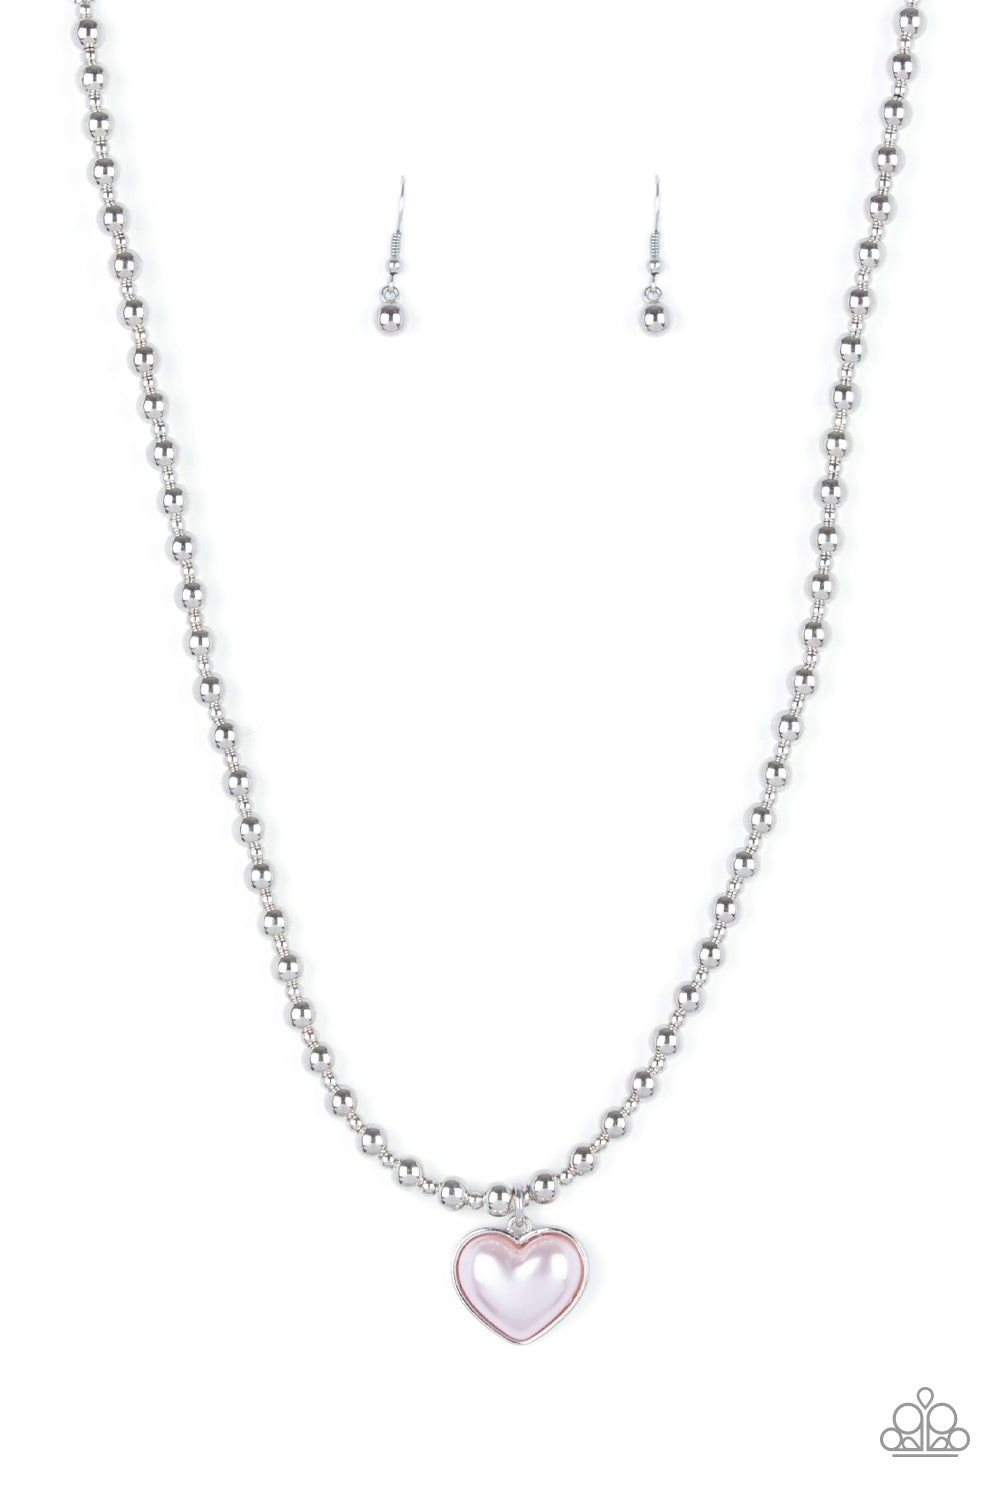 Heart Full of Fancy Pink Necklace - Paparazzi Accessories  Featuring a pearly pink center, a charming heart pendant suspends from a strand of silver beads below the collar for a romantic flair. Features an adjustable clasp closure.  All Paparazzi Accessories are lead free and nickel free!  Sold as one individual necklace. Includes one pair of matching earrings.